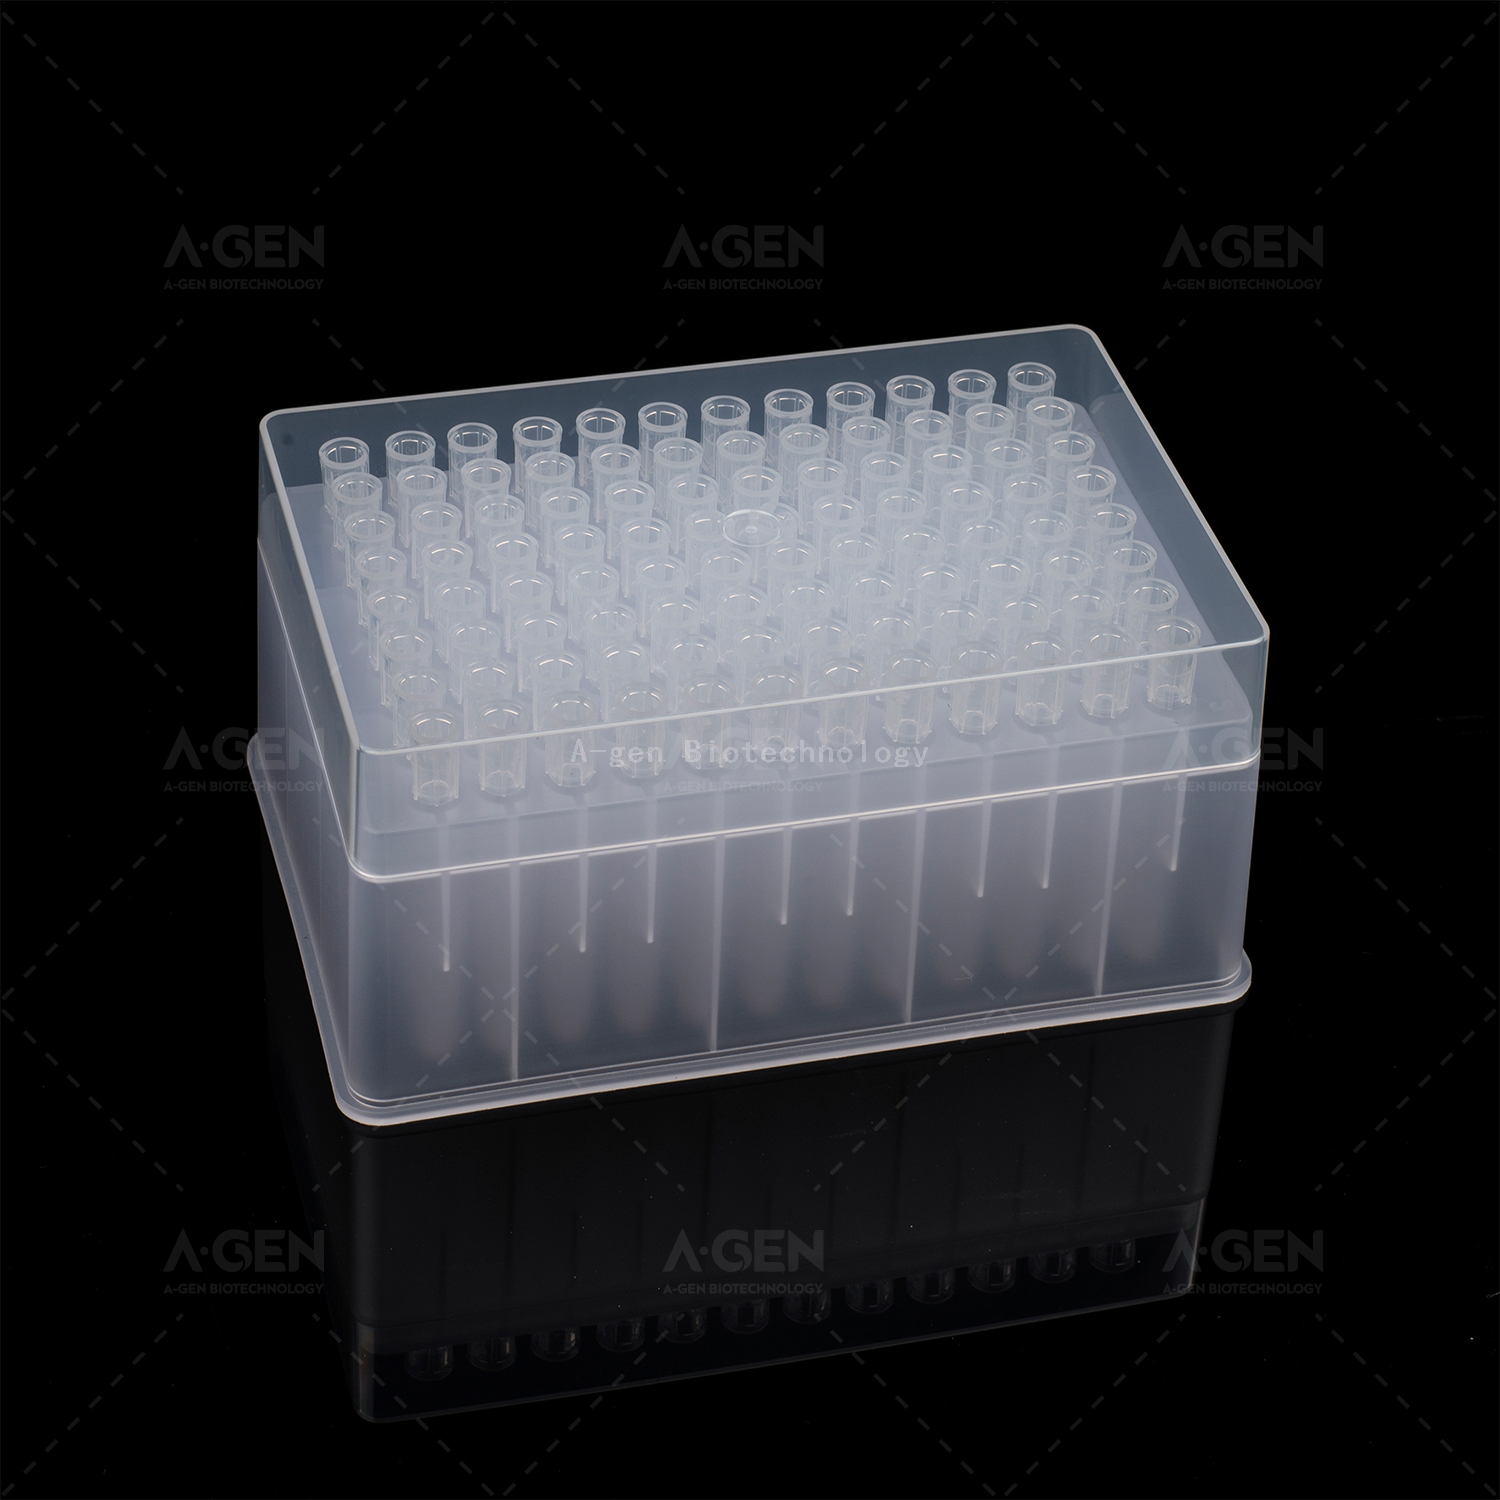 BECKMAN 50μL Clear Robotic PP Pipette Tip (Racked,sterilized) for DNA/RNA Extraction No Filter FX-50-RS